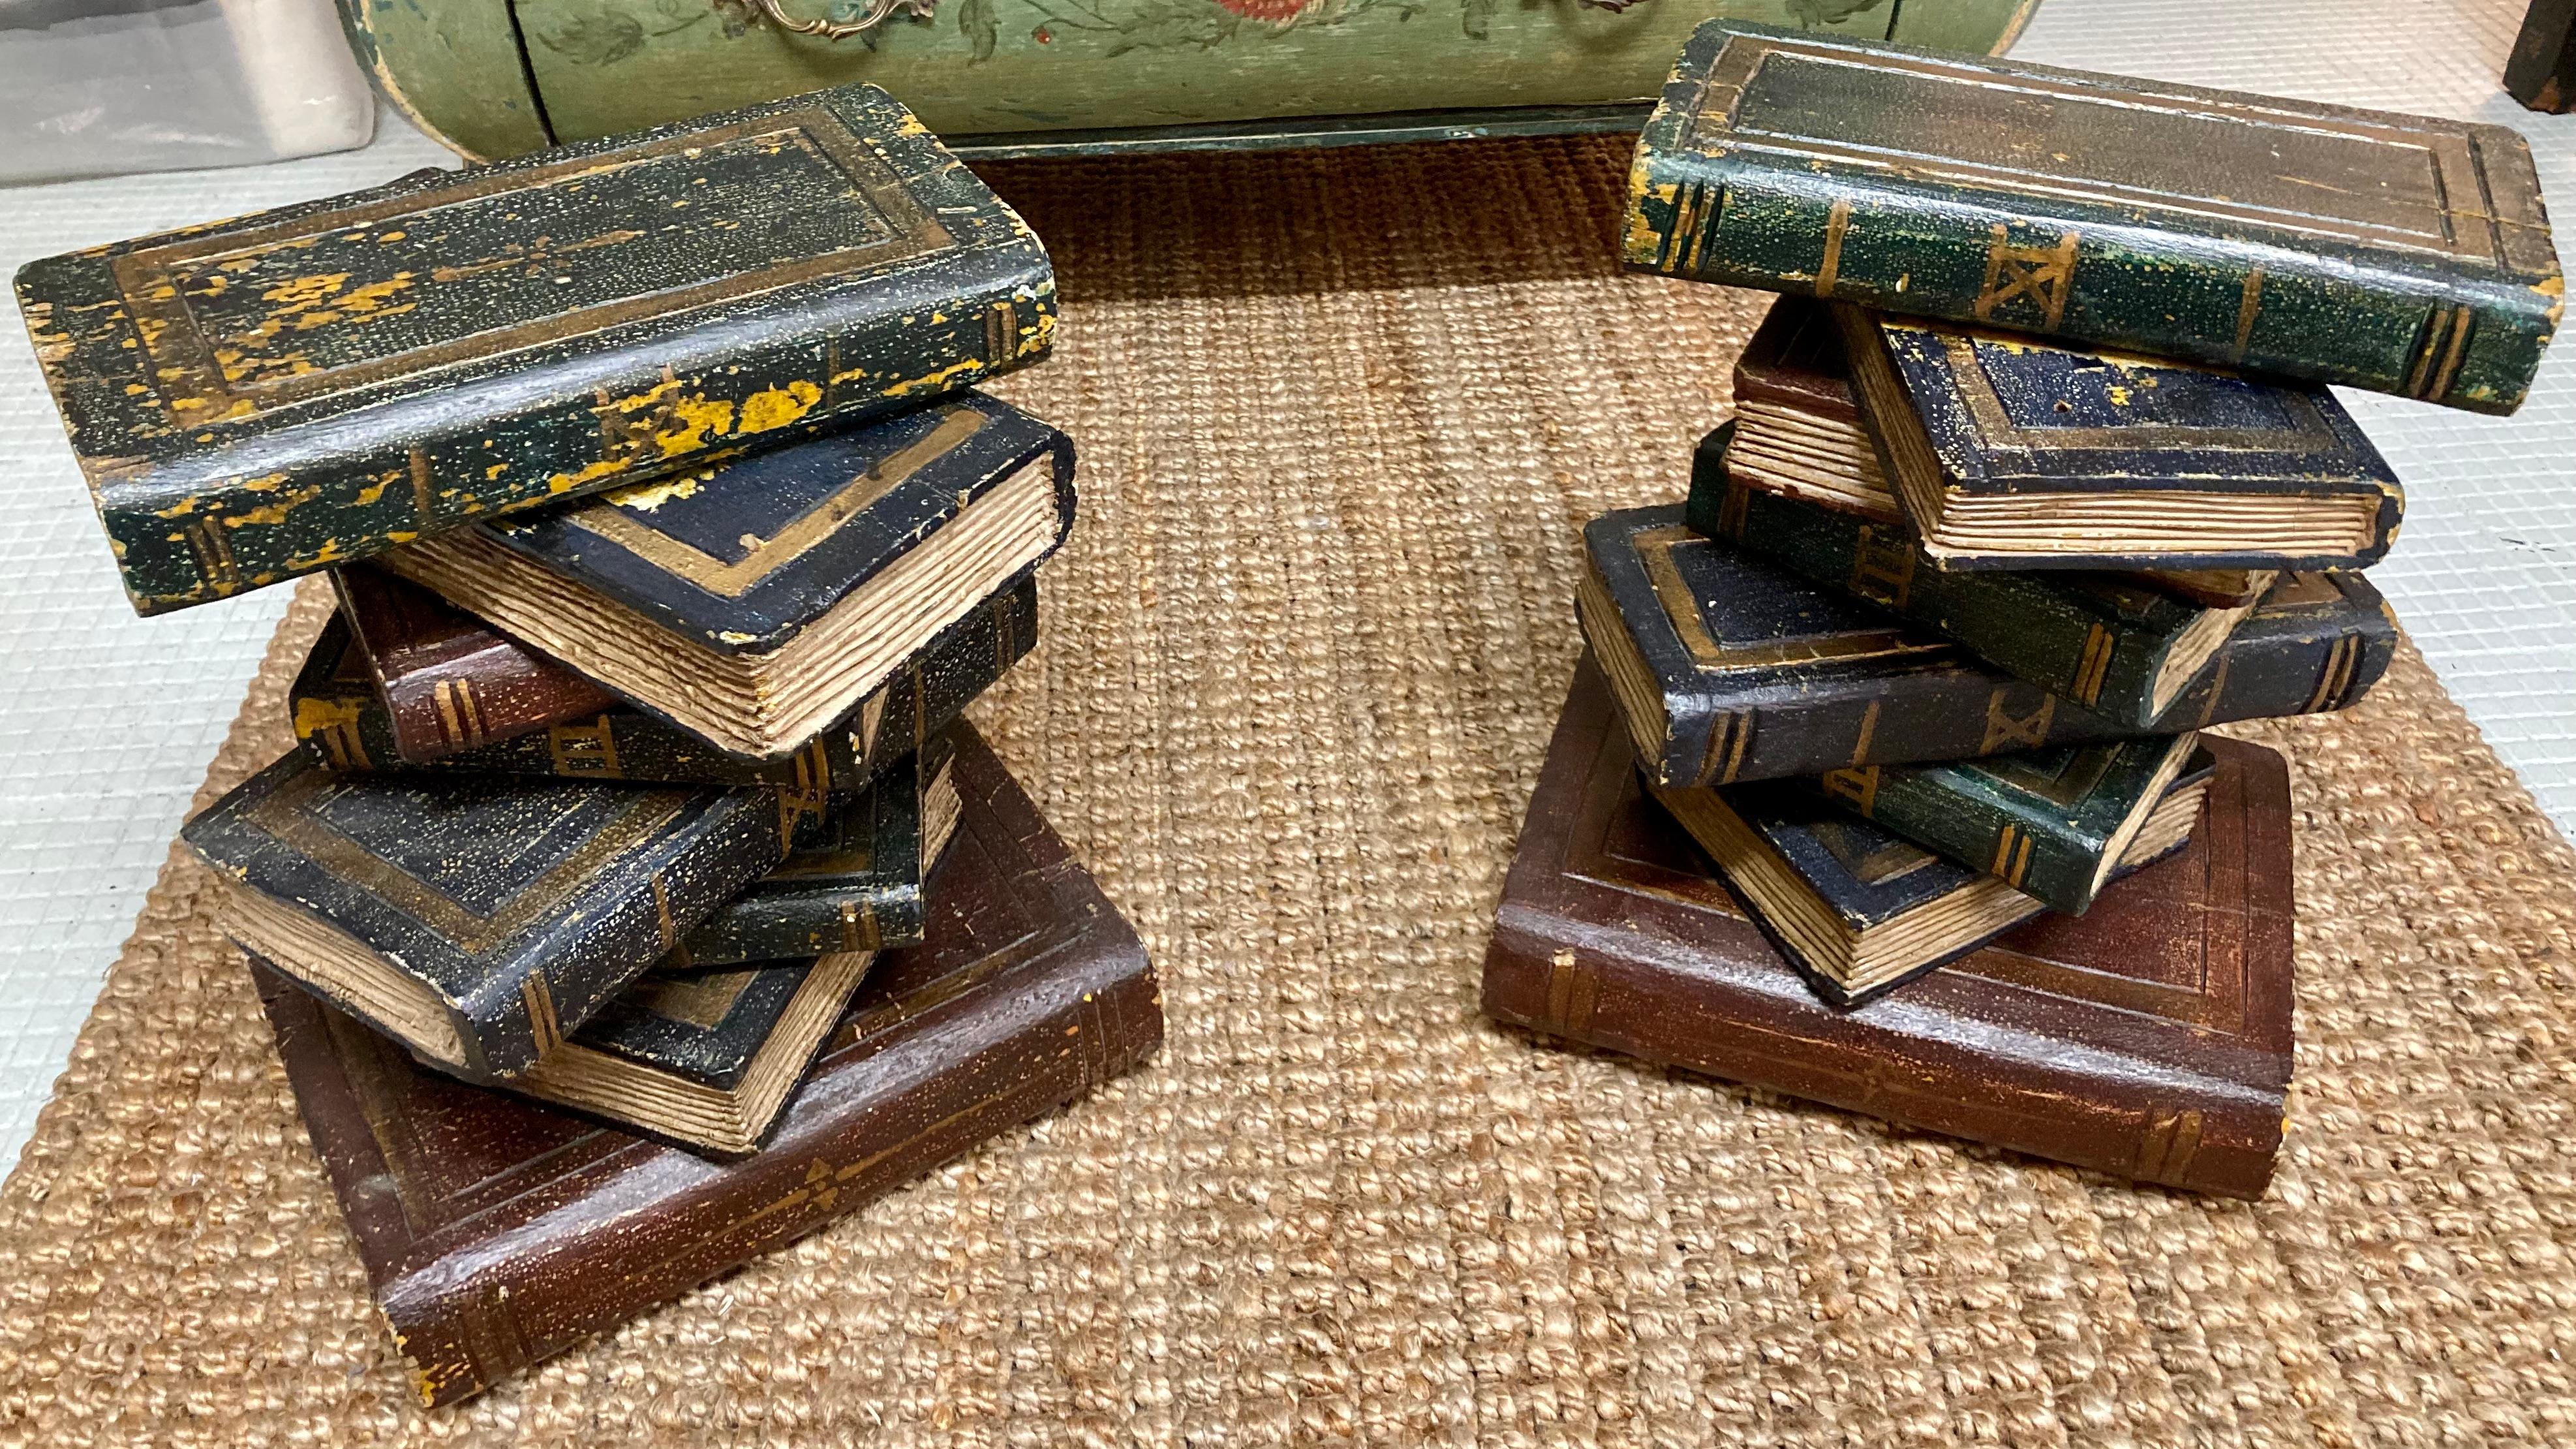 Beautiful pair of French carved wood stacked book cocktail tables. Great addition to your classical inspired interiors.